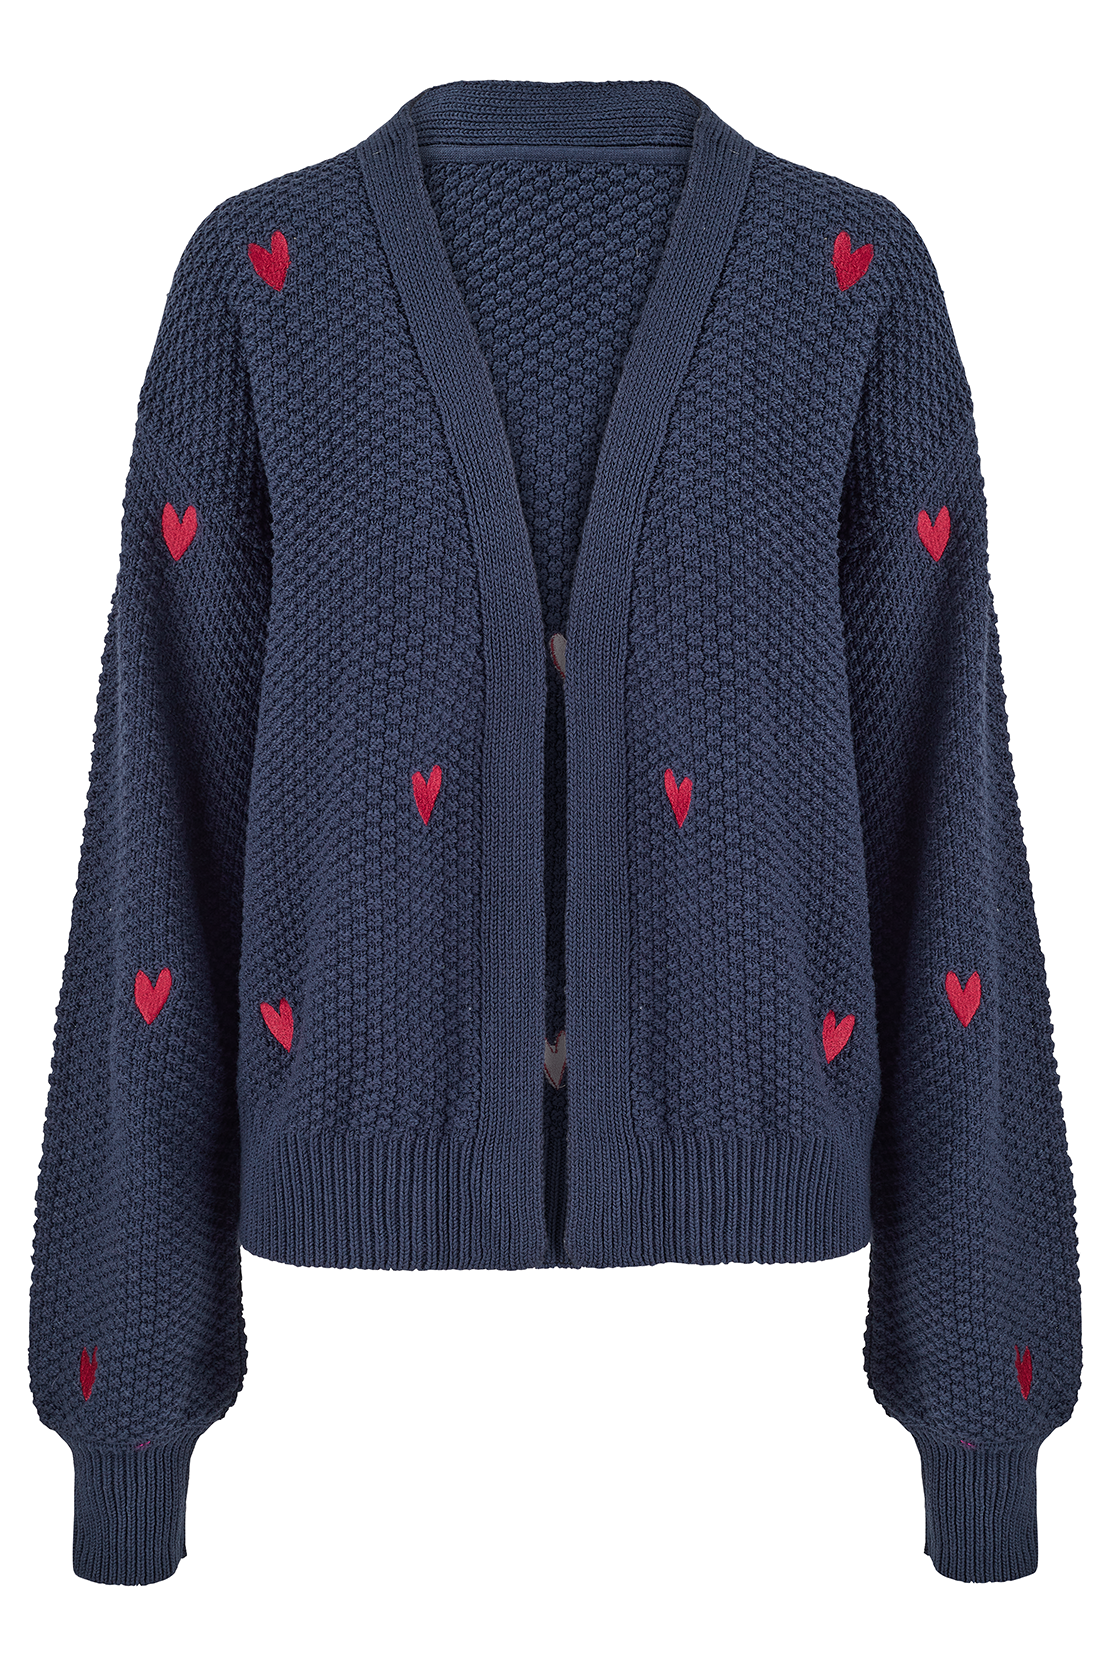 O&F Heart Embroidered Cardigan - Navy